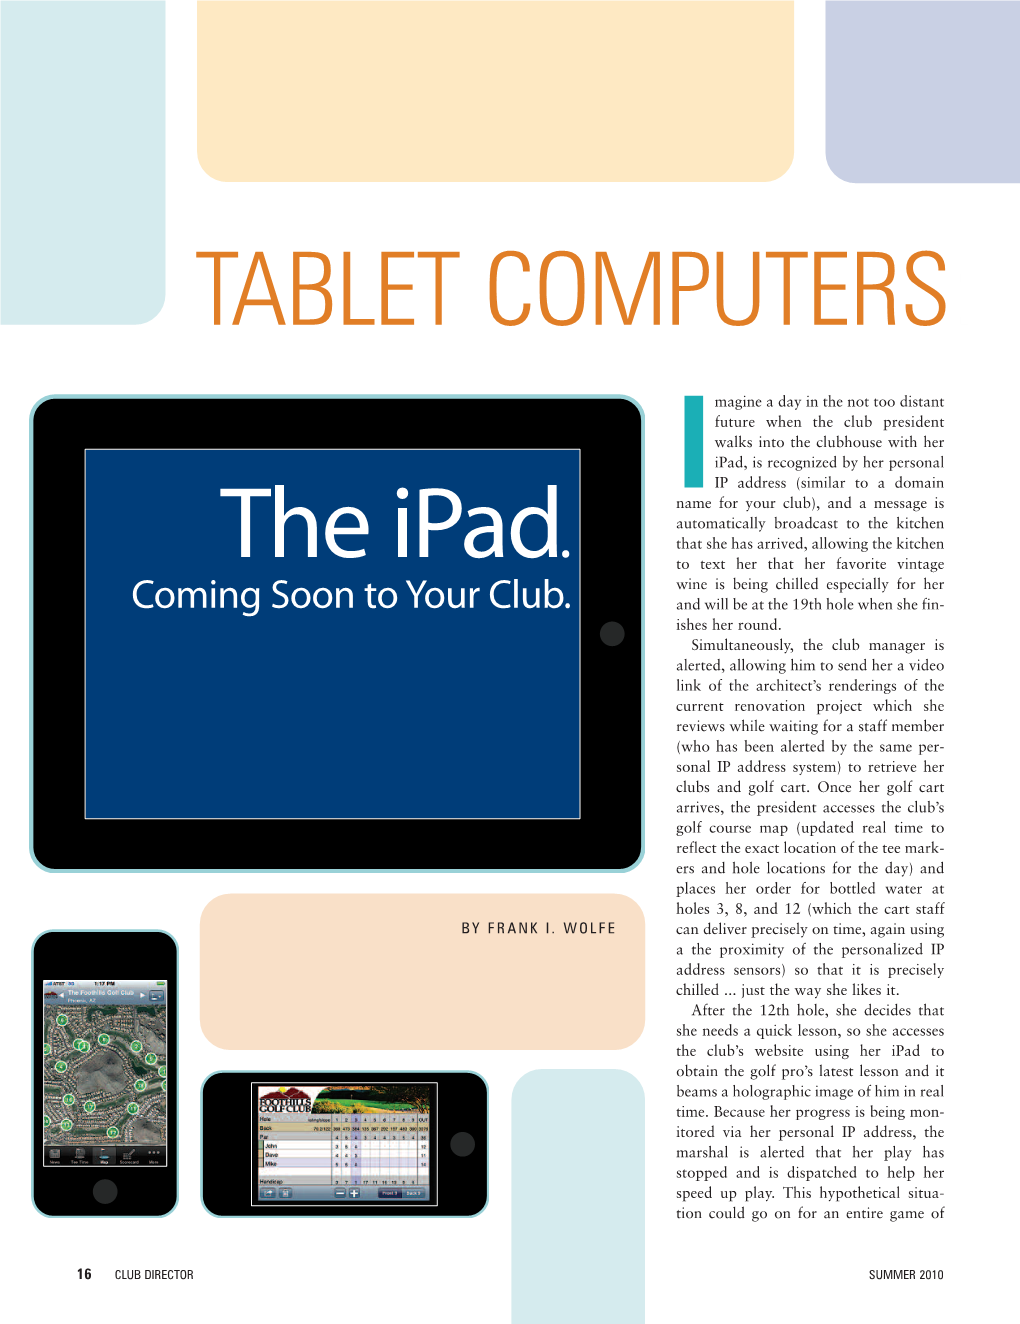 TABLET COMPUTERS: the Ipad